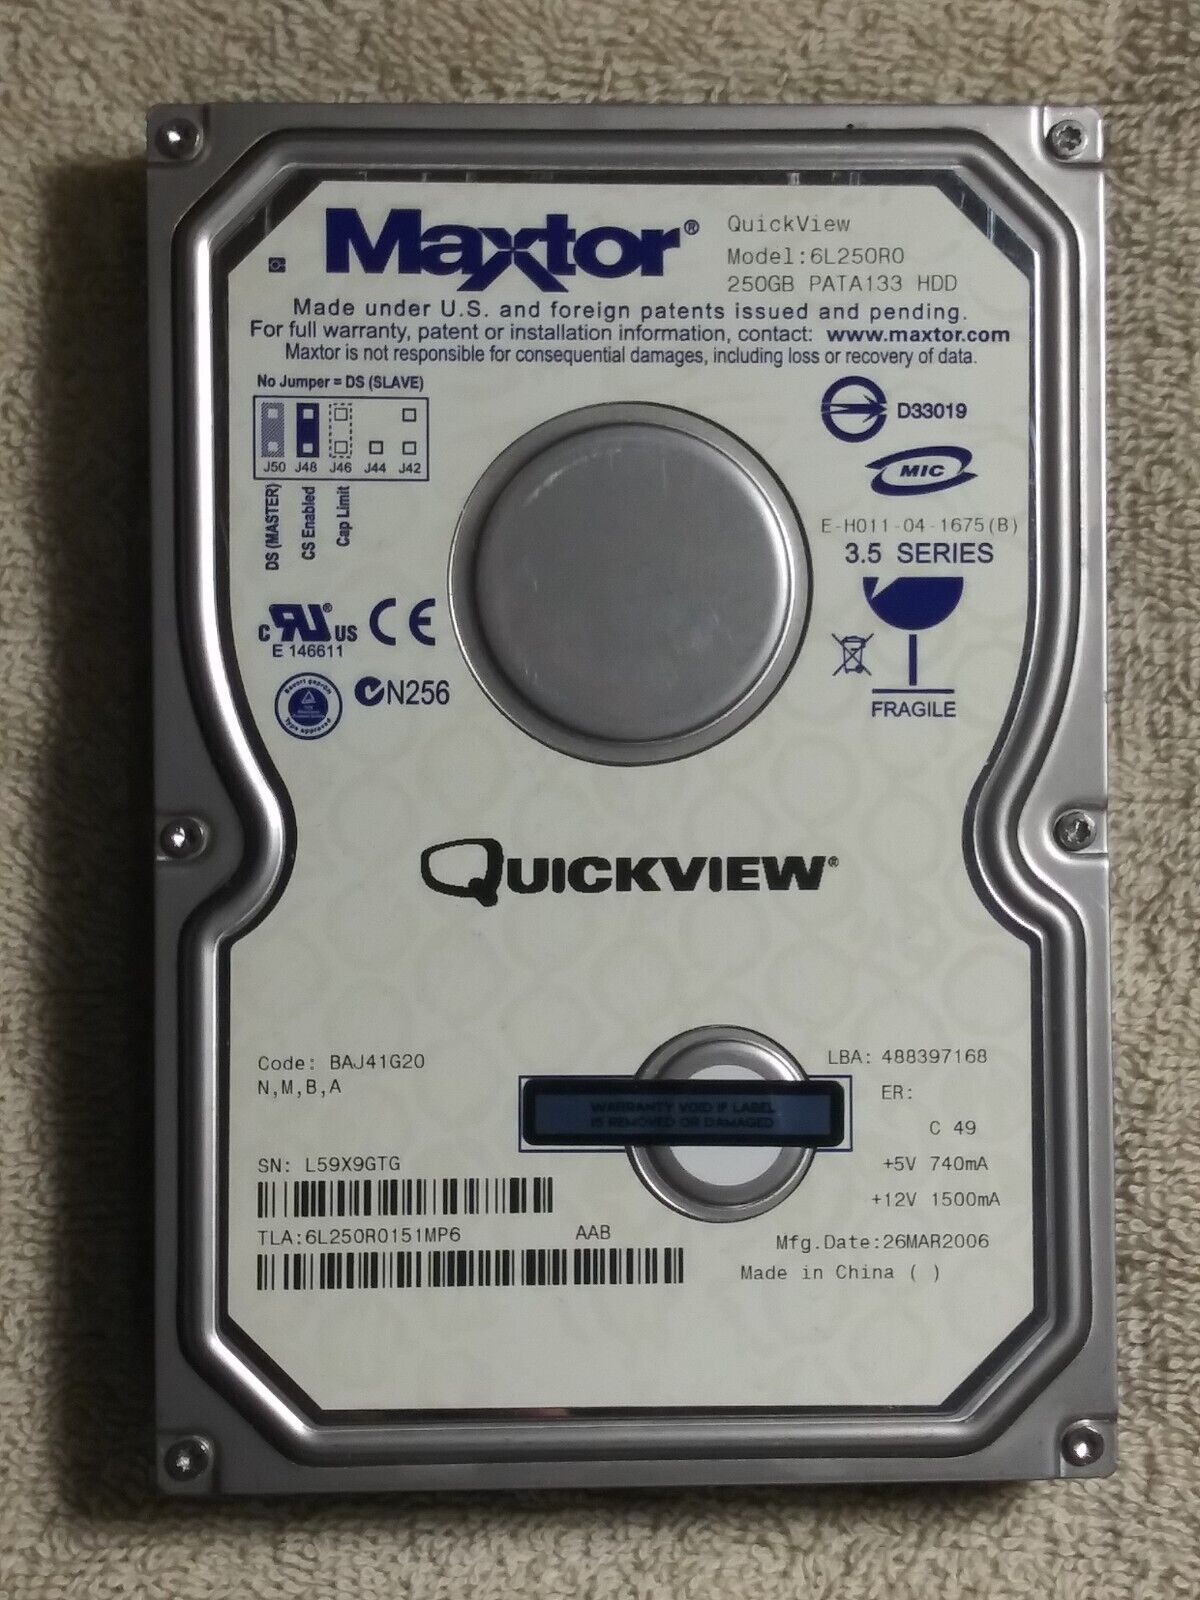 MAXTOR QuickView 6L250R0 250GB 7200 RPM PATA 133 HDD